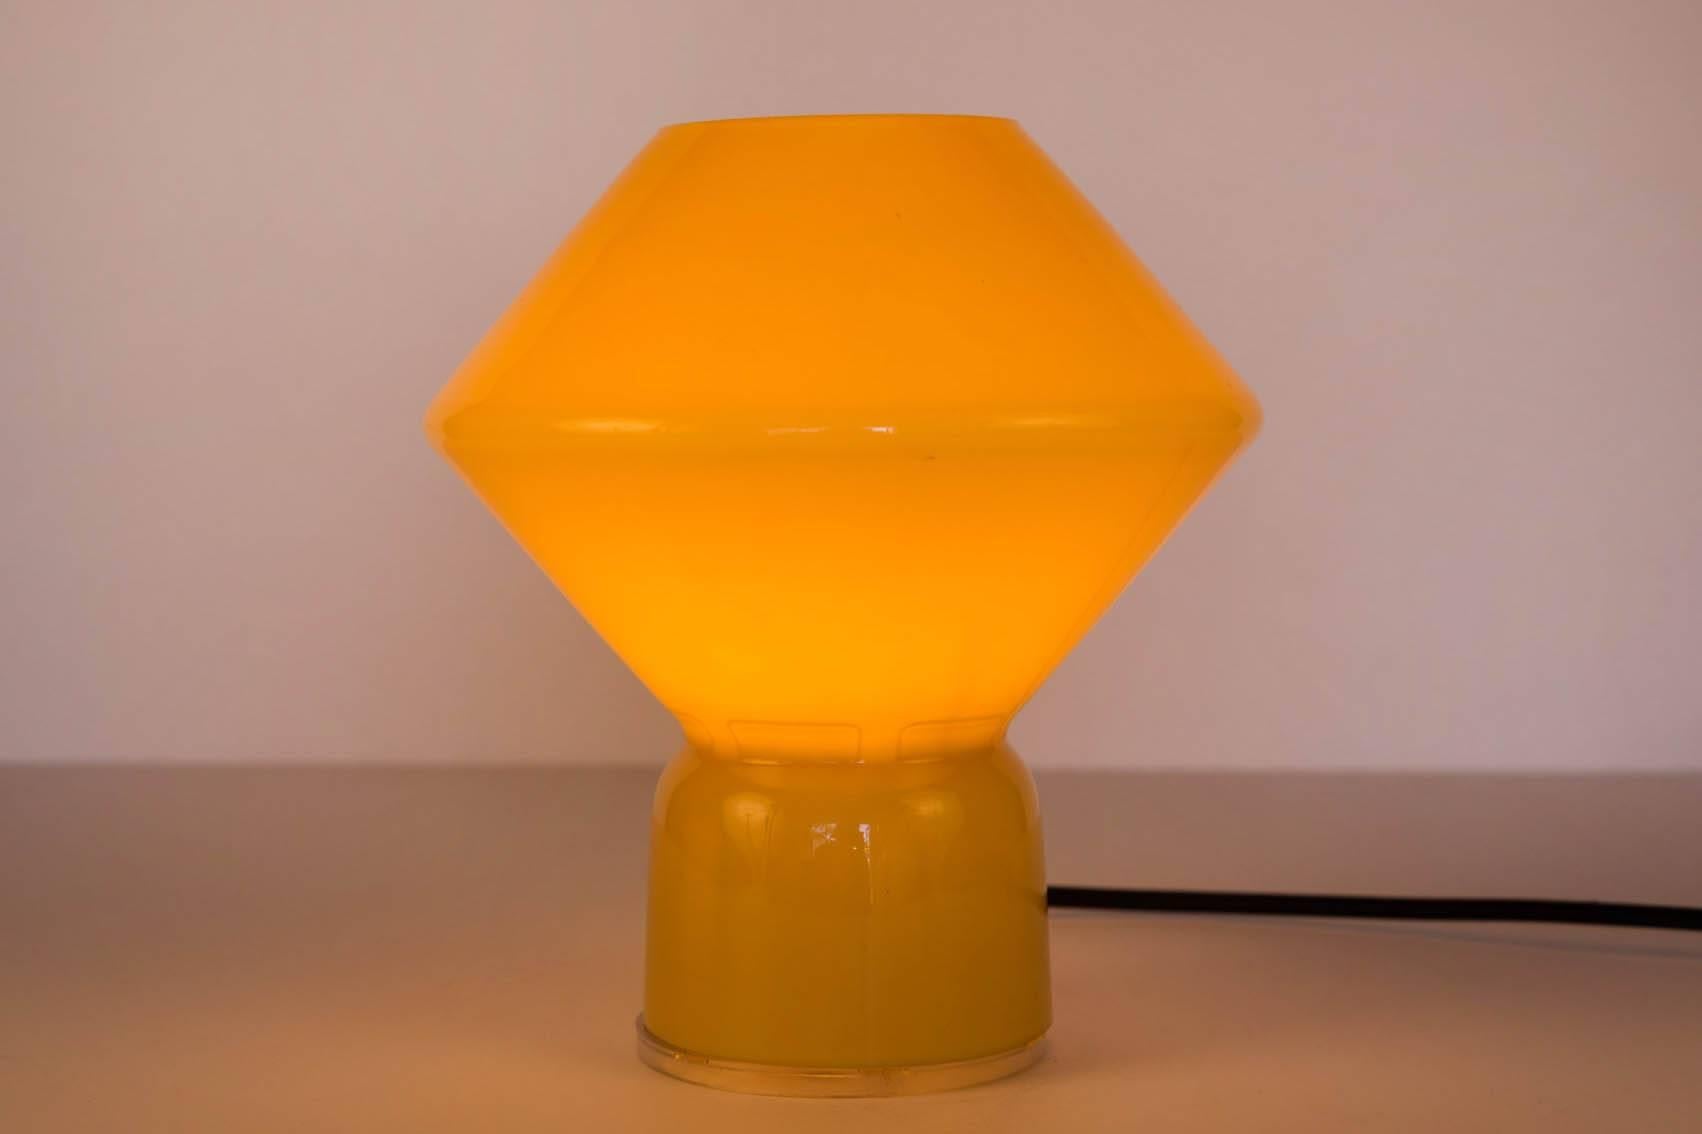 1980s Memphis style 'Conica' table lamp for Artemide. Designed by Alessandro Mendini. Original manufacturer's stamp impressed on base. Handcrafted in Murano amber glass, this petite lamp is strongly associated with the 1980s Memphis style that came